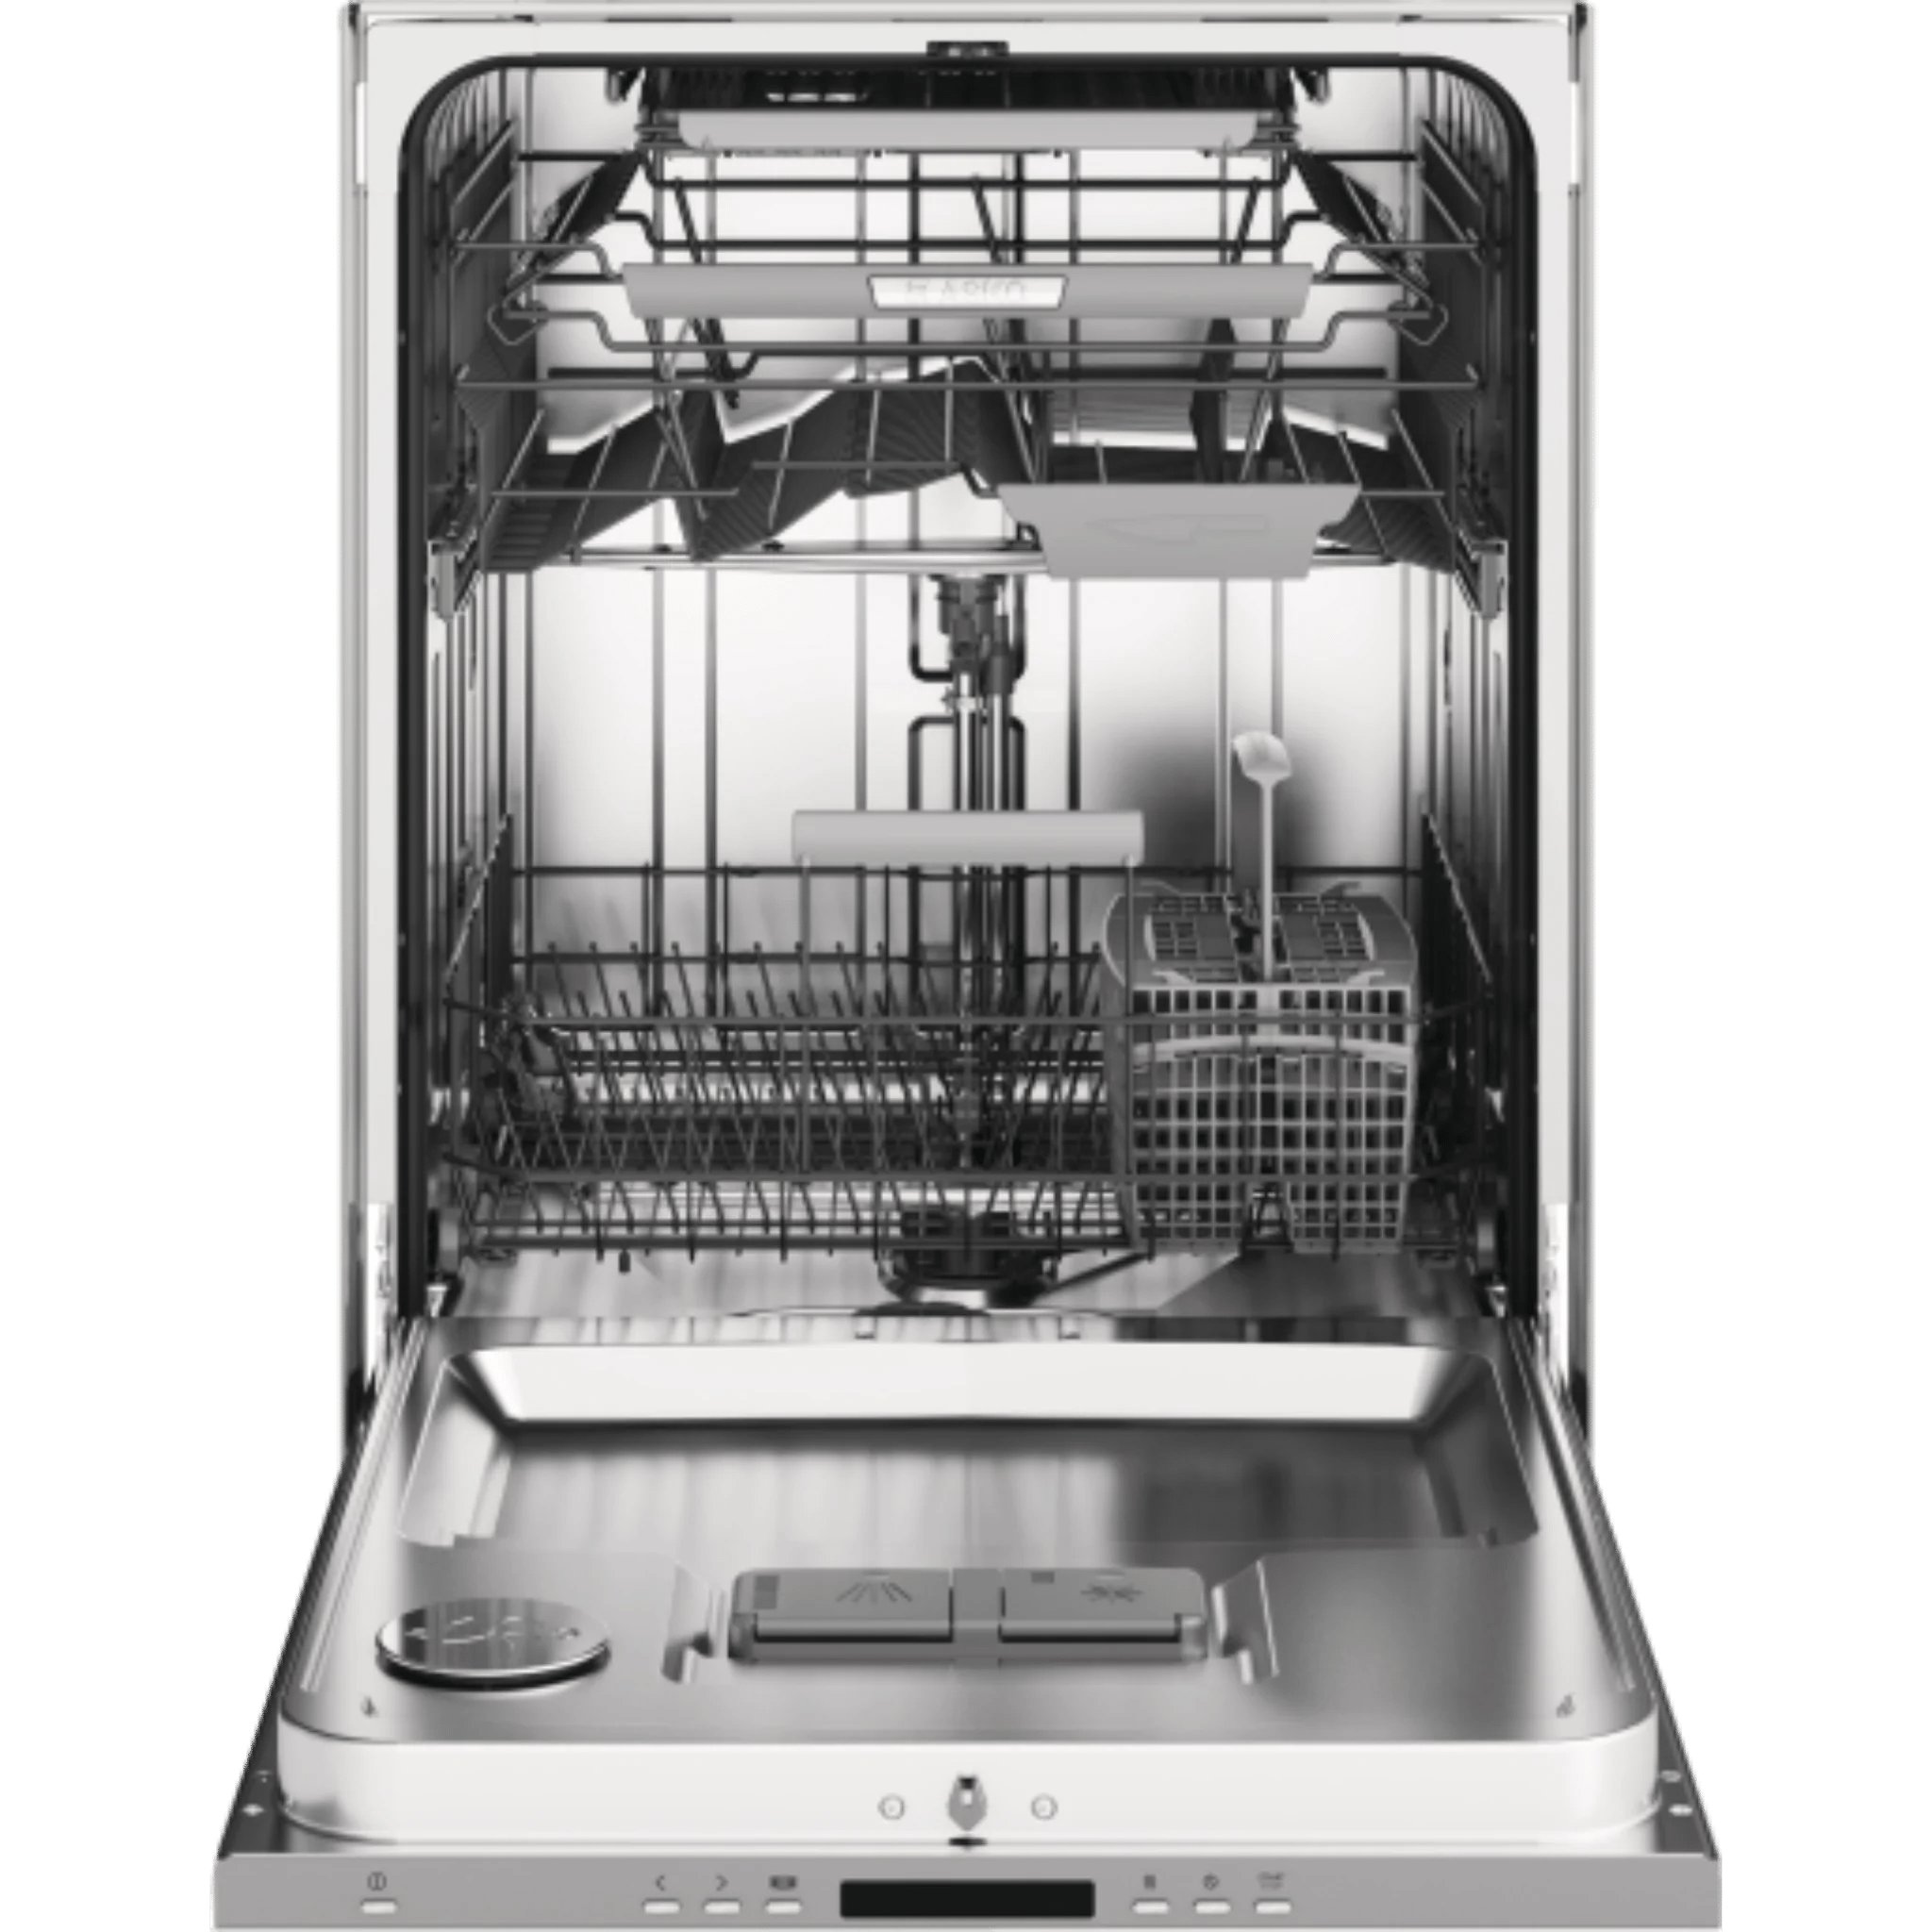 Asko 40 Series 24 Inch Wide 16 Place Setting Energy Star Rated Built-In Top Control Dishwasher with Turbo Drying and Integrated Handle Dishwashers DBI664IXXLS Luxury Appliances Direct